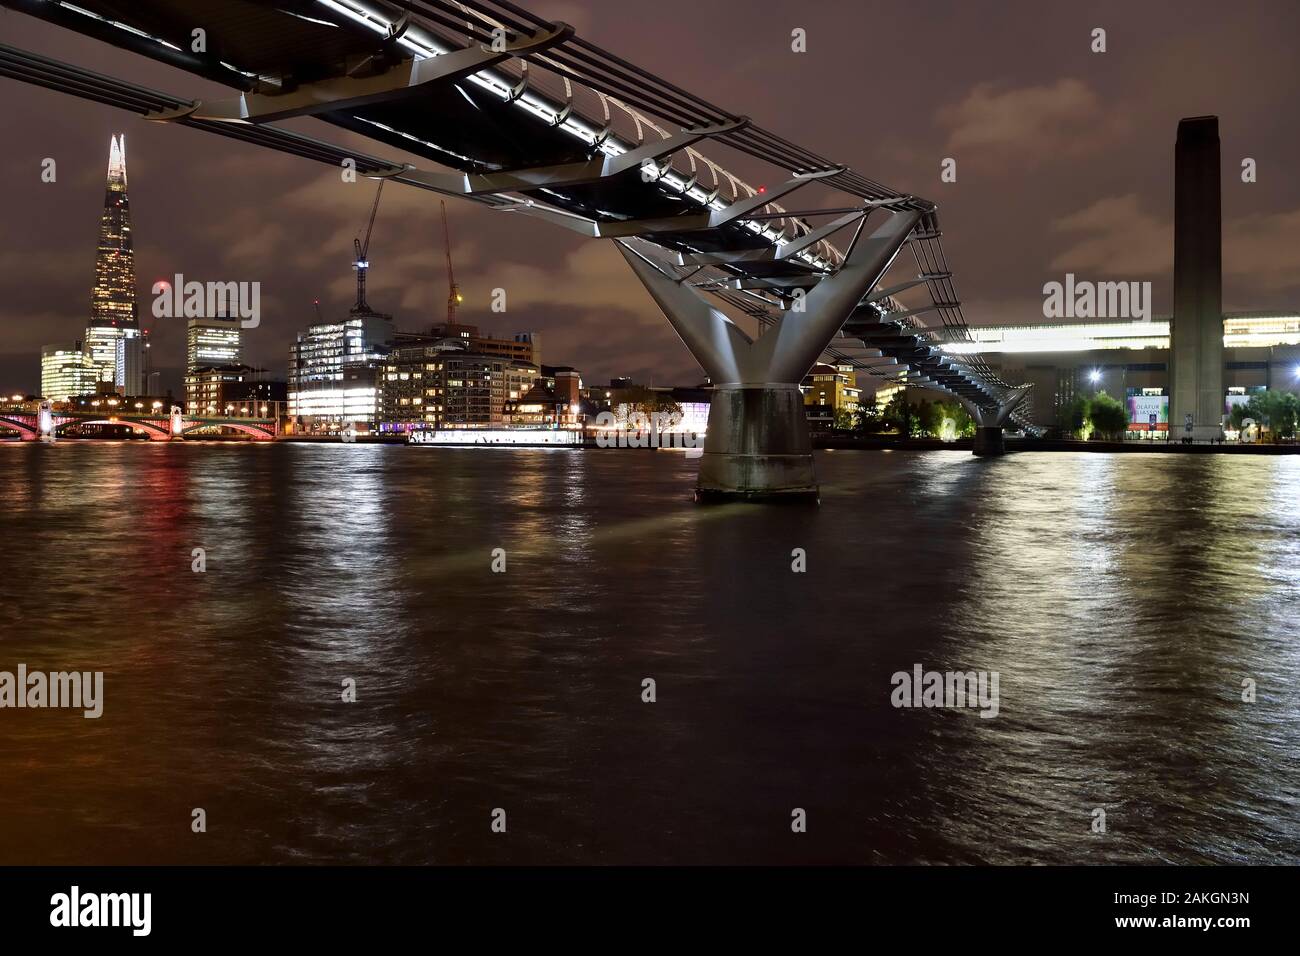 United Kingdom, London, the Millenium Bridge, The Shard, the tallest tower in London by Renzo Piano, and the Tate Modern in the background Stock Photo